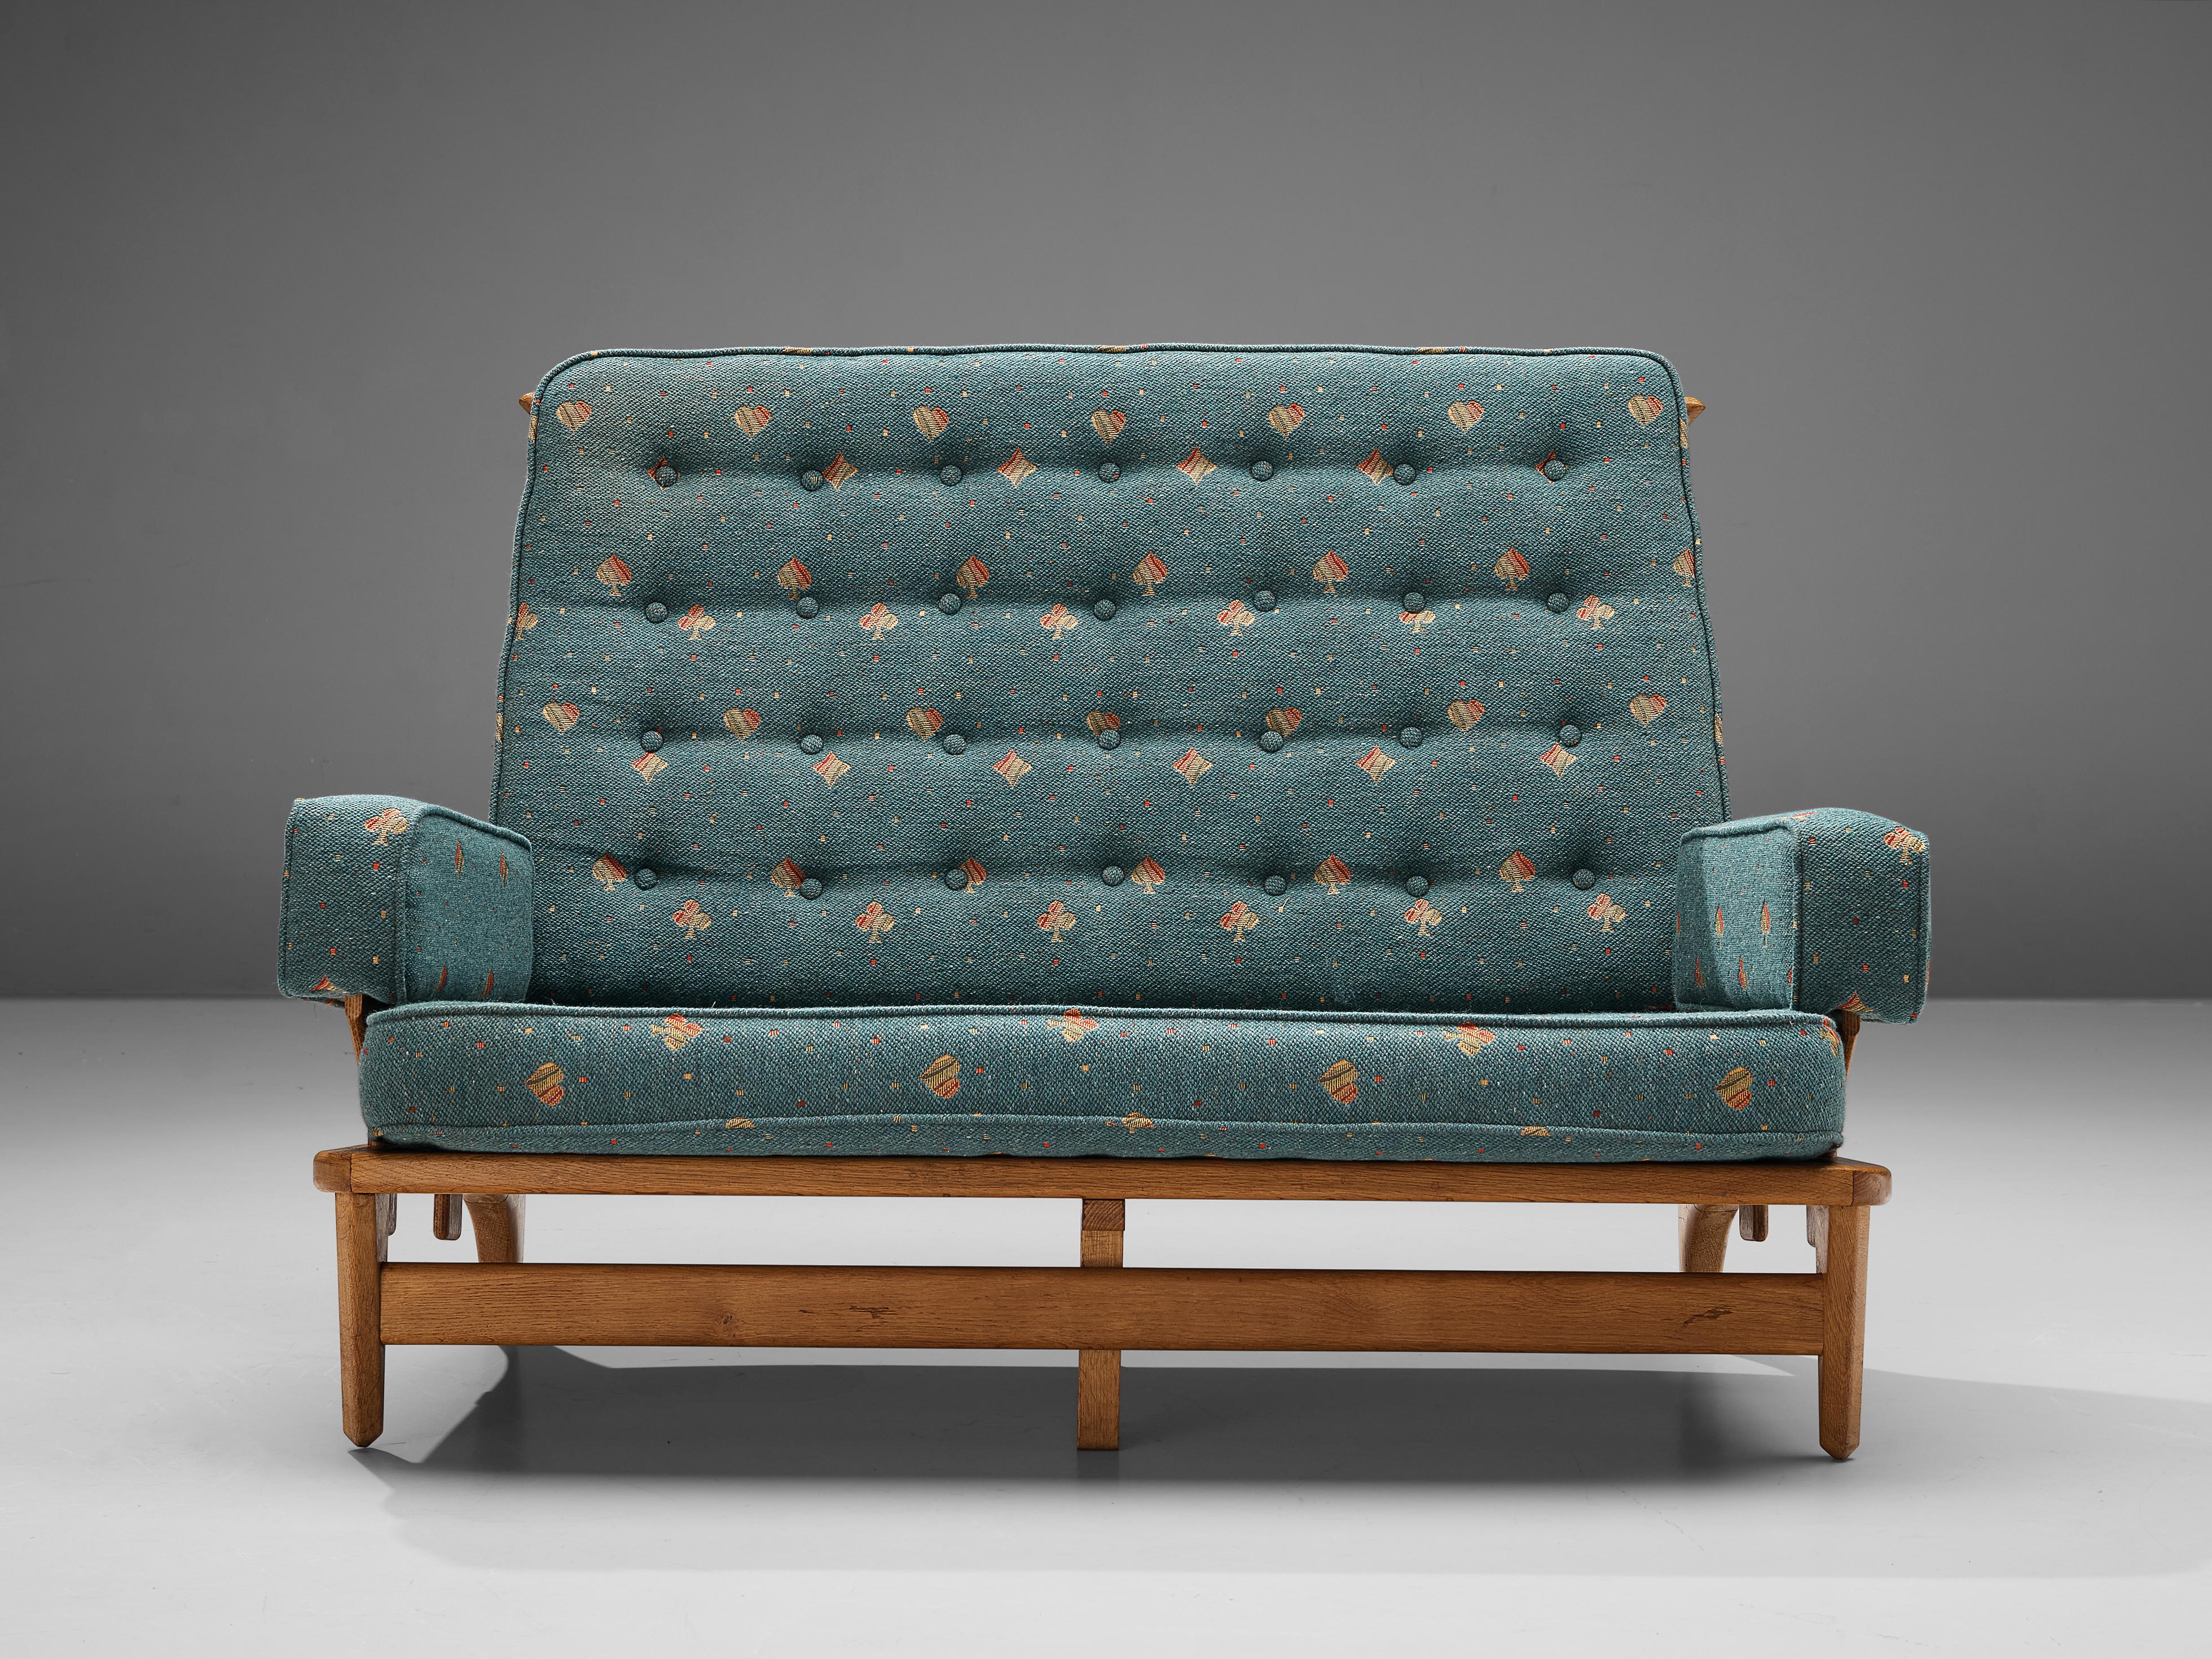 Guillerme & Chambron Sofa in Teal Upholstery  For Sale 1